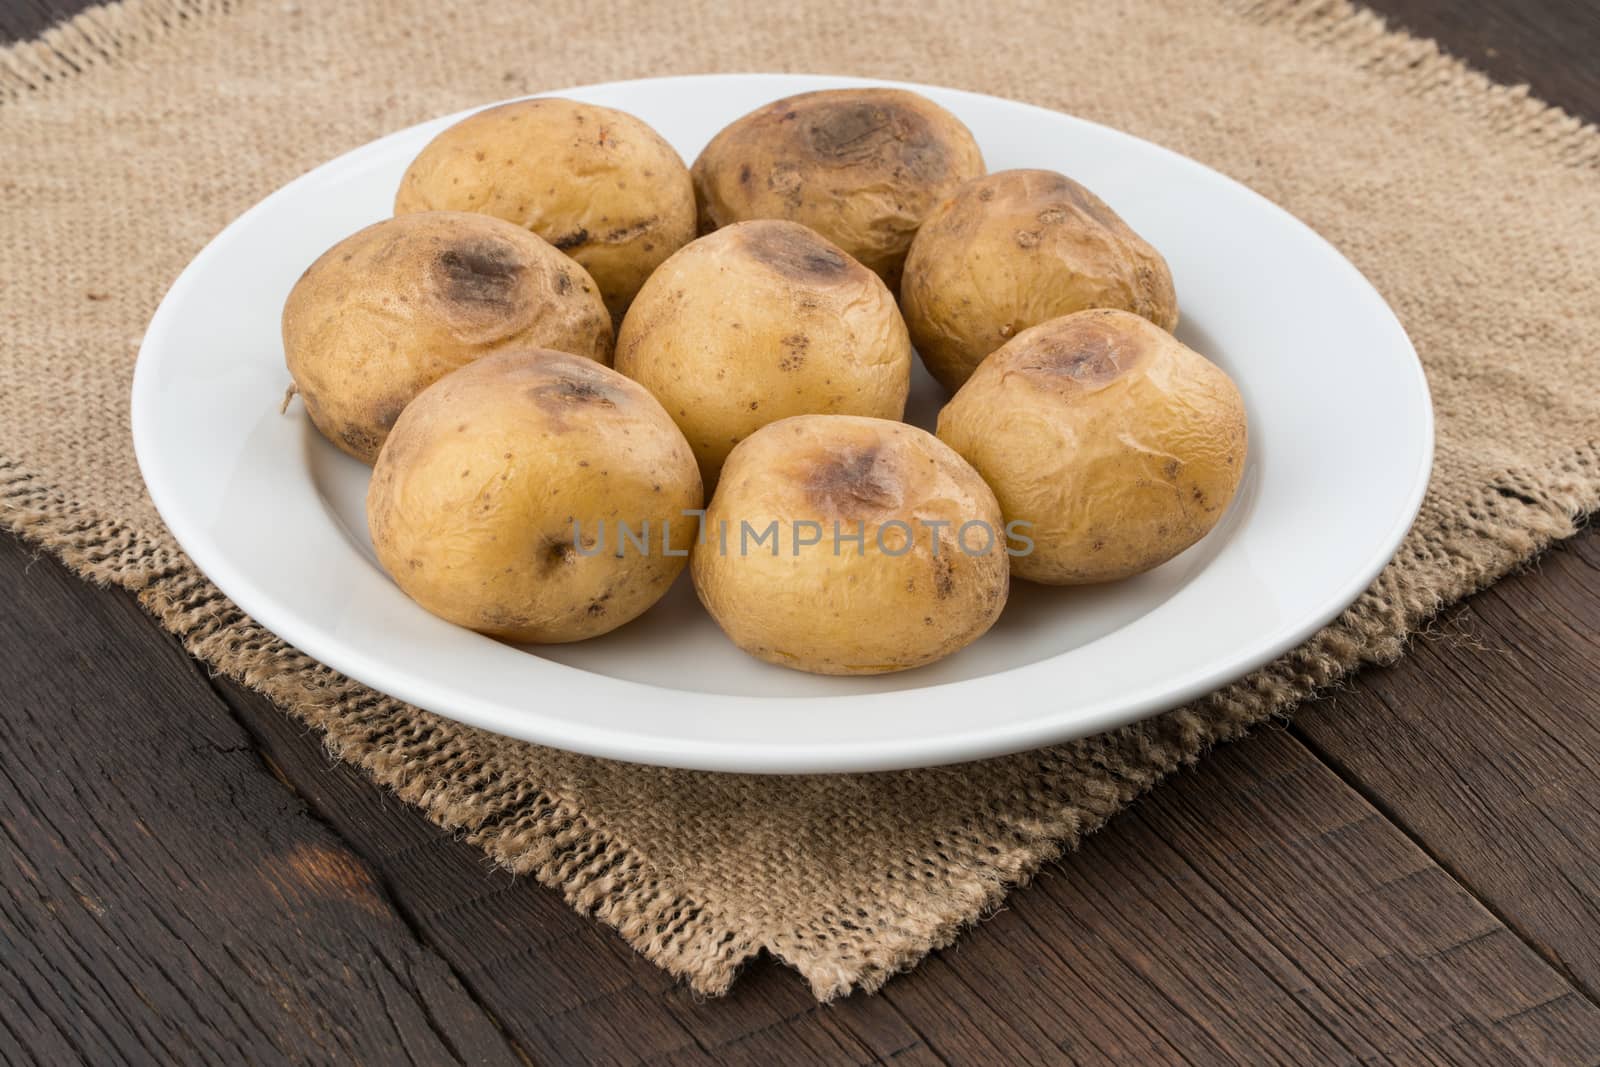 baked potatoes in a white plate on old wooden table by DGolbay